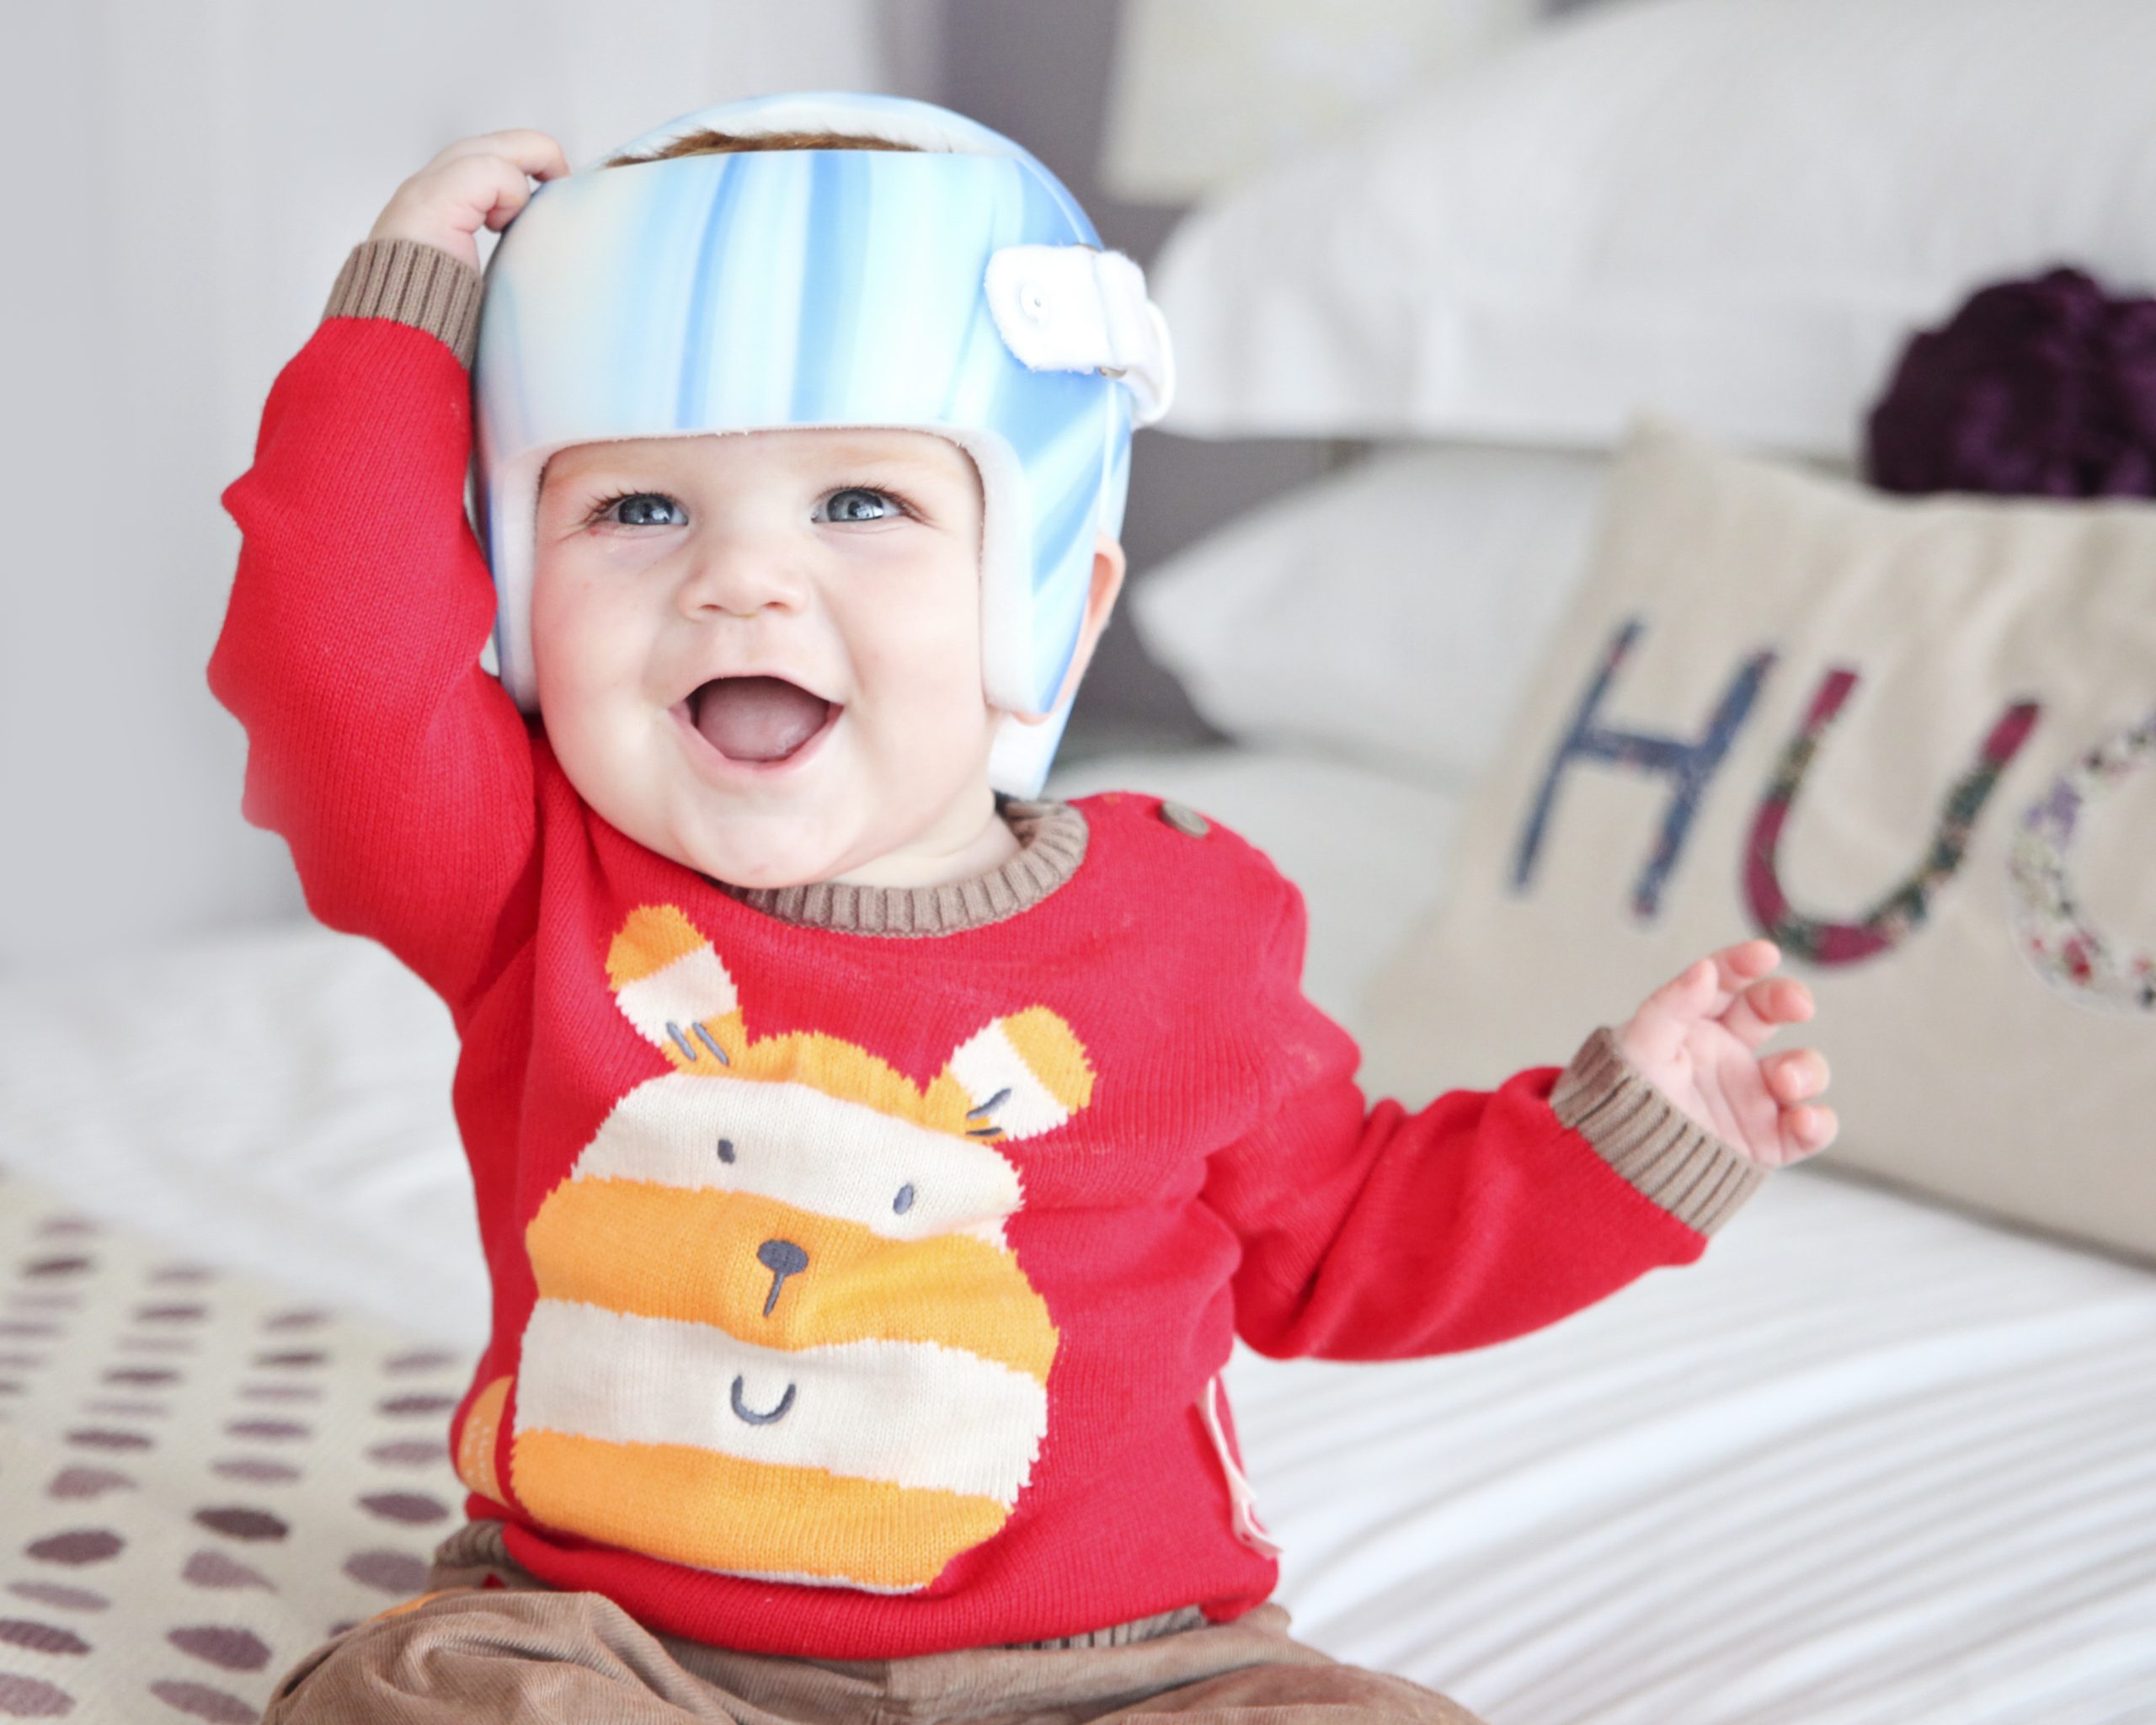 Helmet therapy demonstrates its efficacy in treating babies